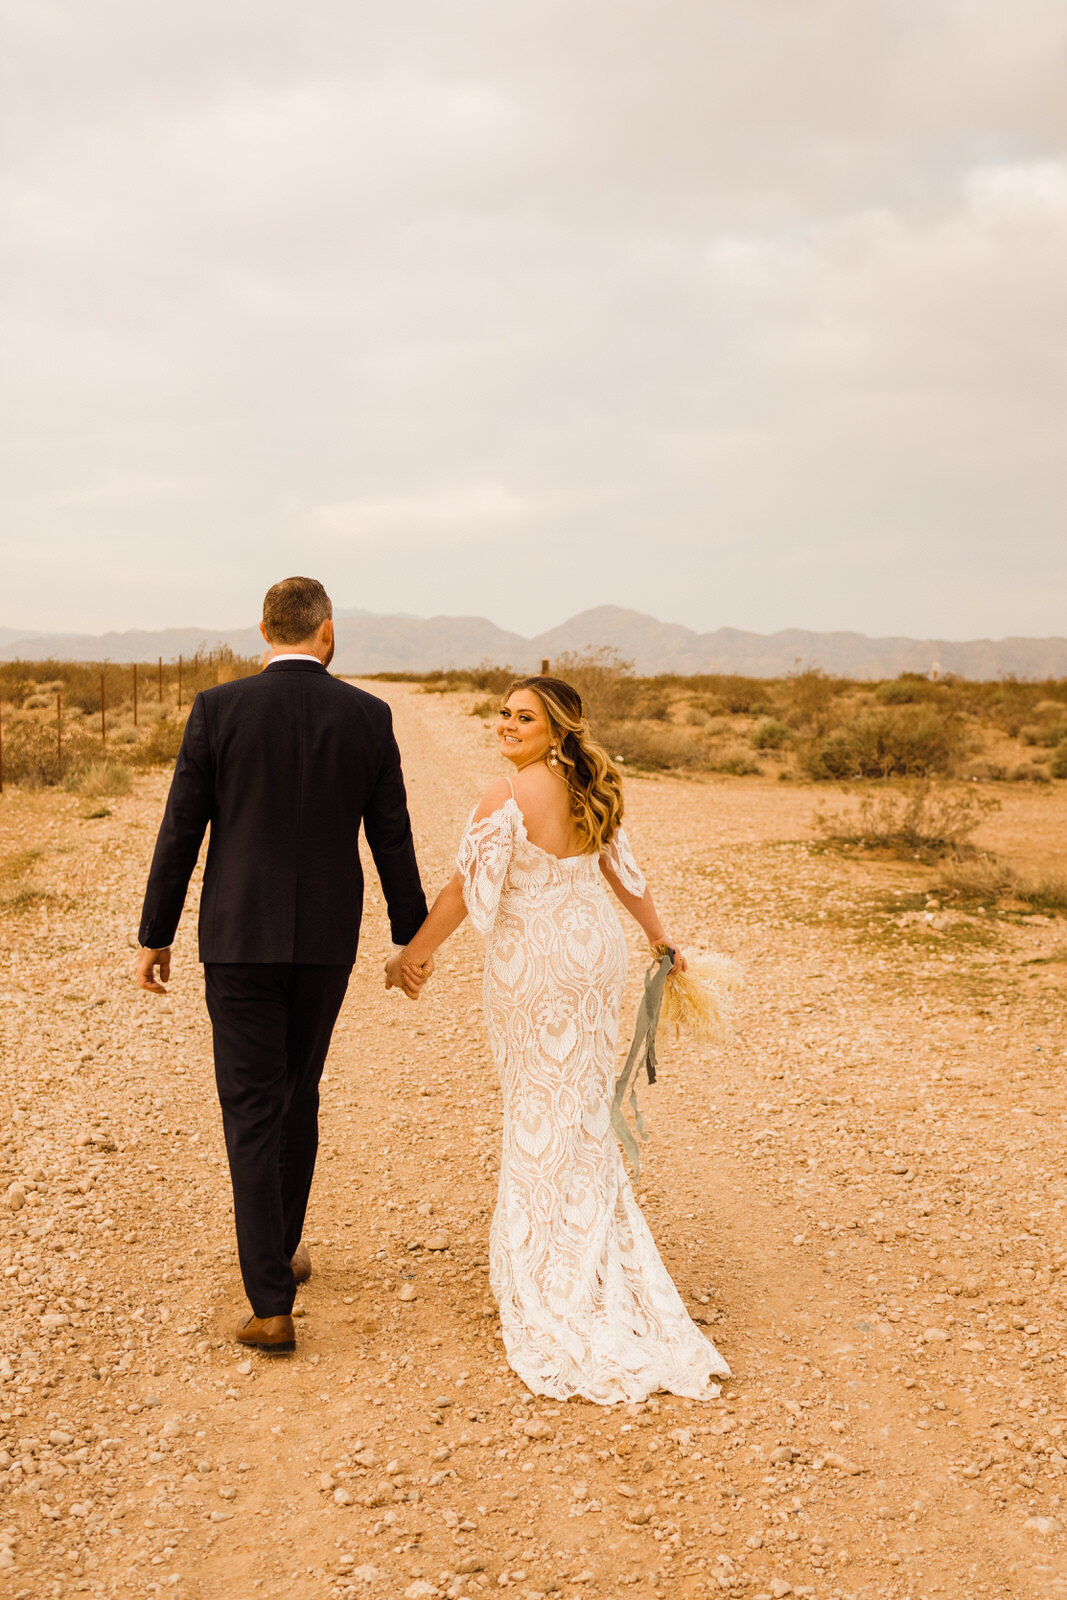 Bride in boho lace gown looks over shoulder walking with groom on dirt road in Las Vegas, NV